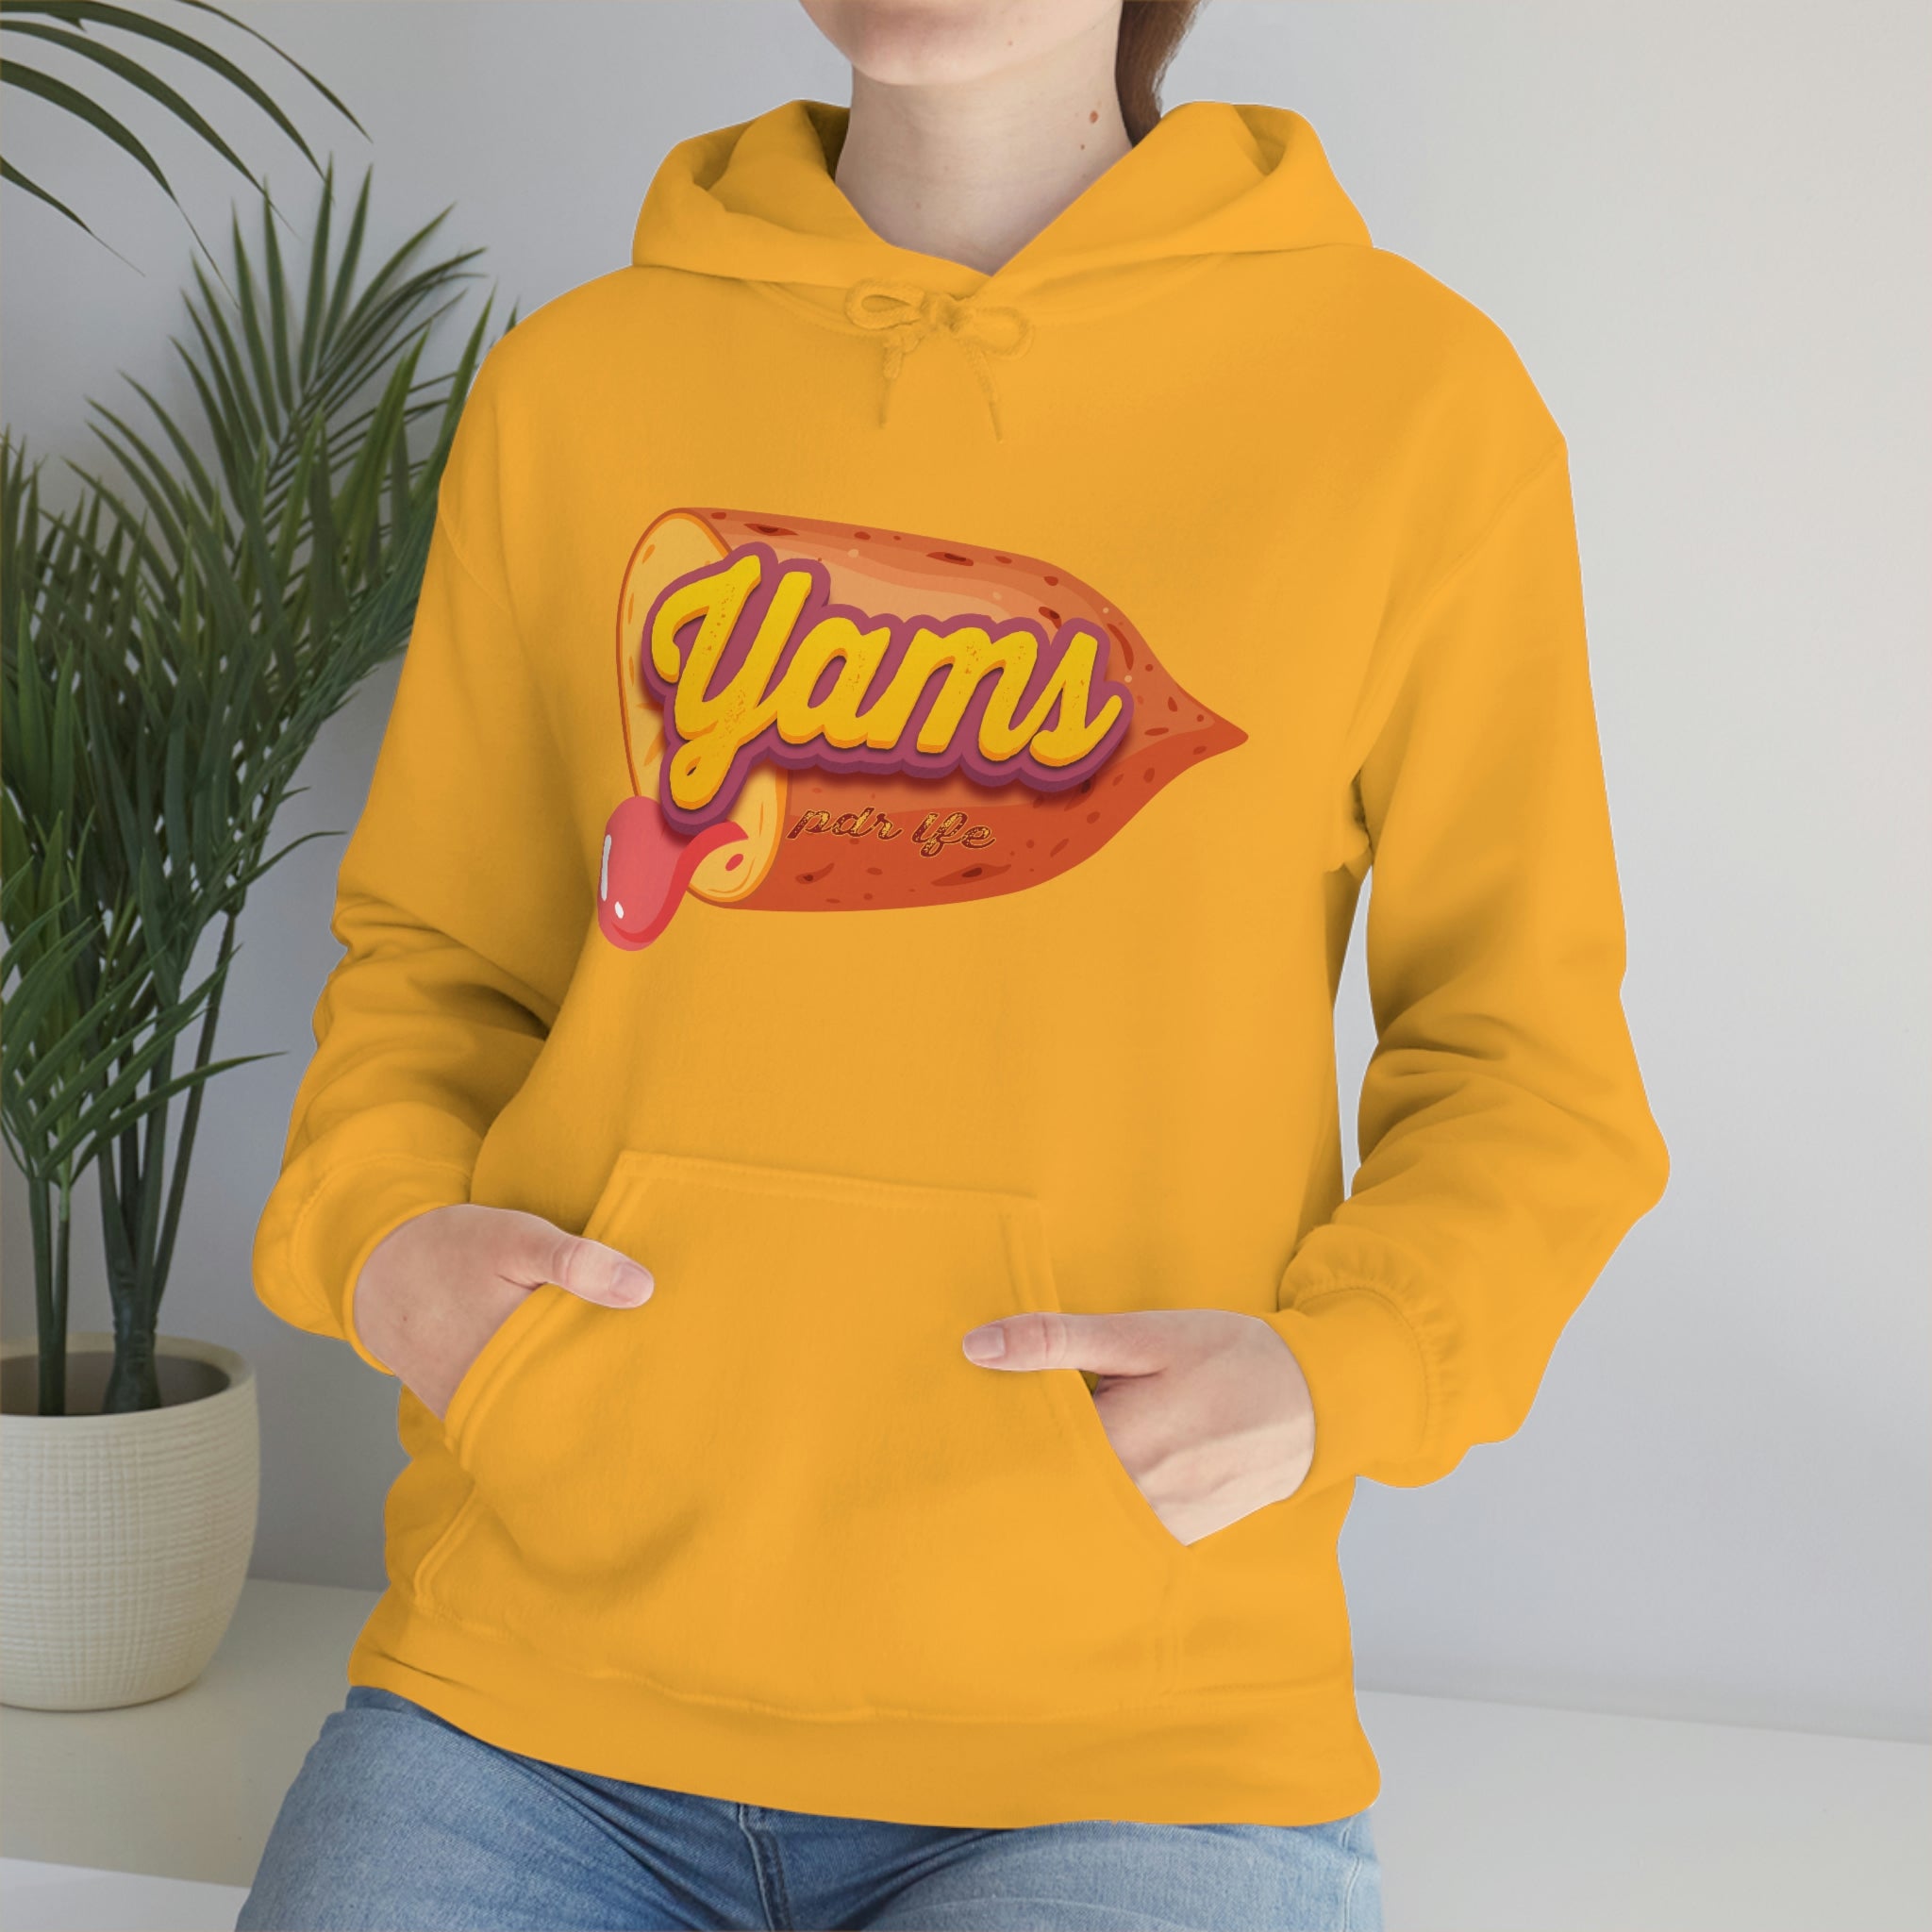 This unisex heavy blend hooded sweatshirt is relaxation itself. Made with a thick blend of cotton and polyester, it feels plush, soft and warm, a perfect choice for any cold day. In the front, the spacious kangaroo pocket adds daily practicality while the hood's drawstring is the same color as the base sweater for extra style point